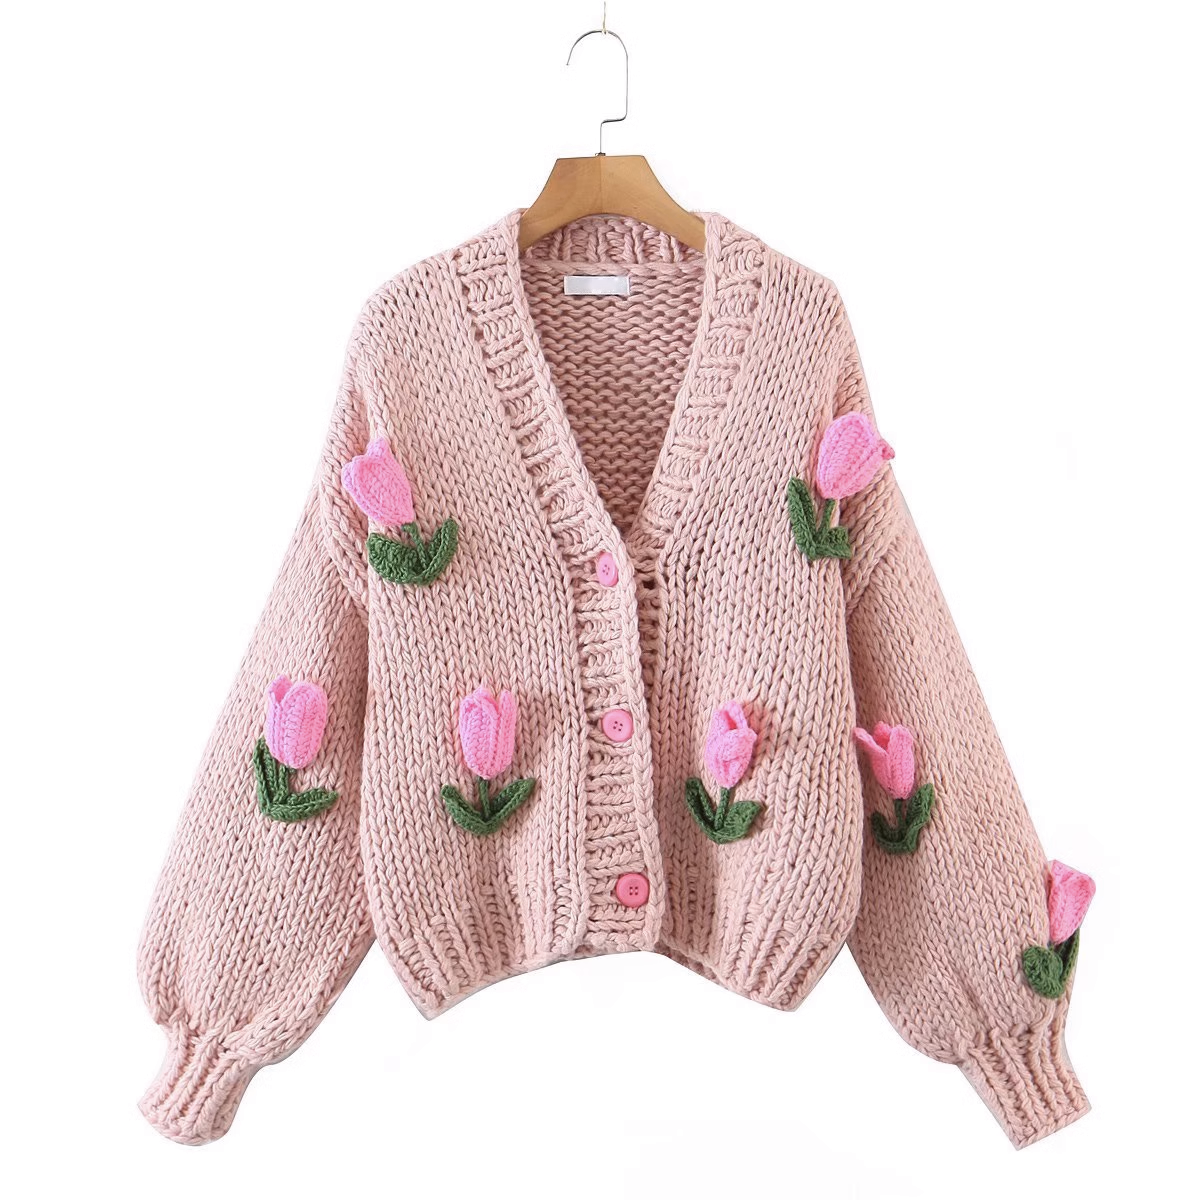 Tulip Matching Adult Cardigan (Two colors)